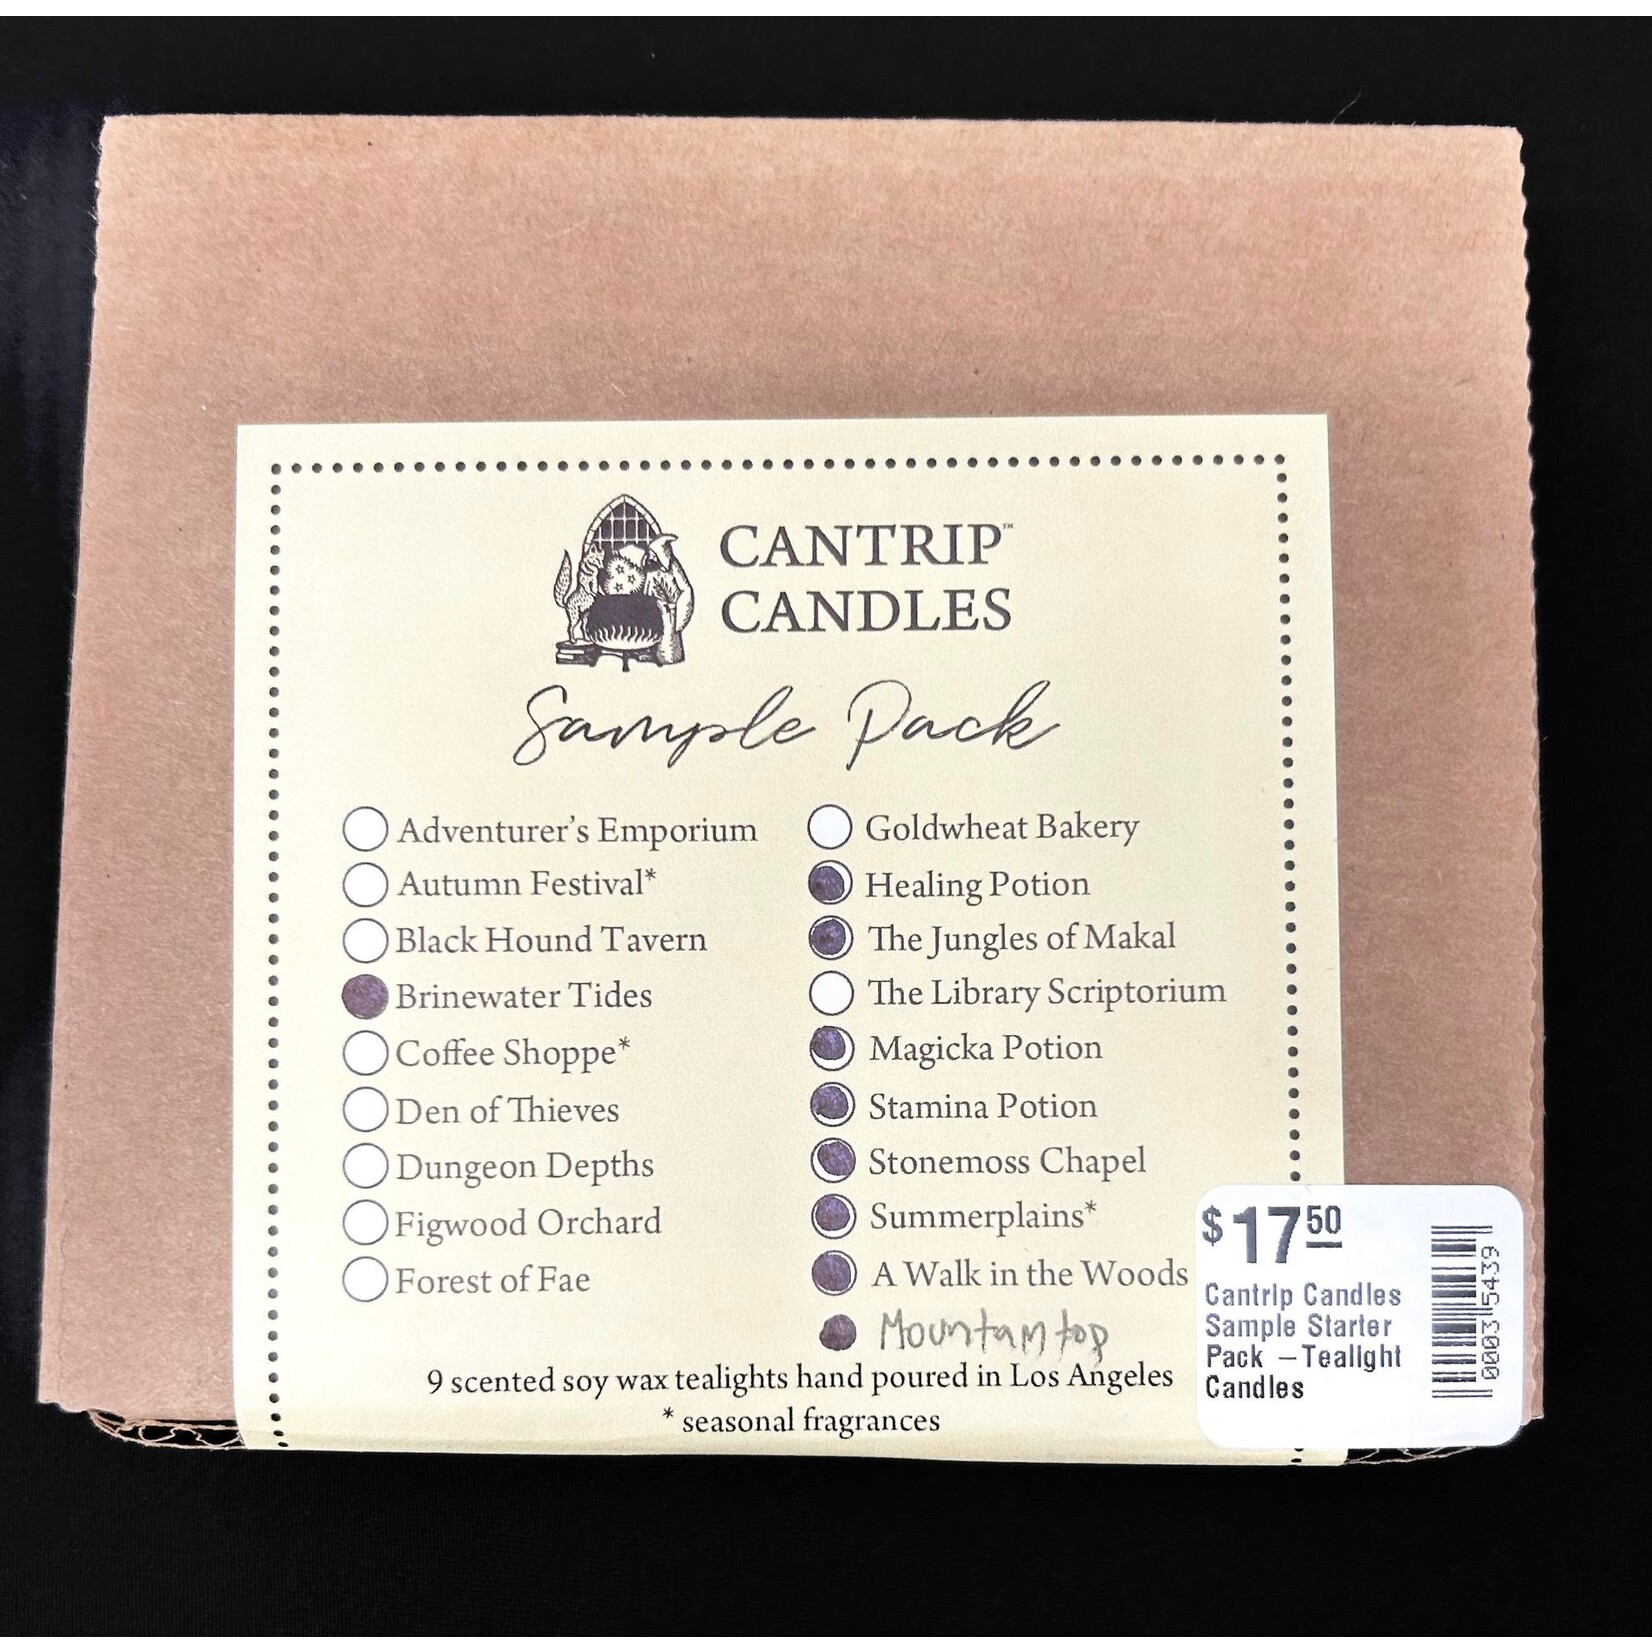 Cantrip Candles Sample Starter Pack -Tealight Candles